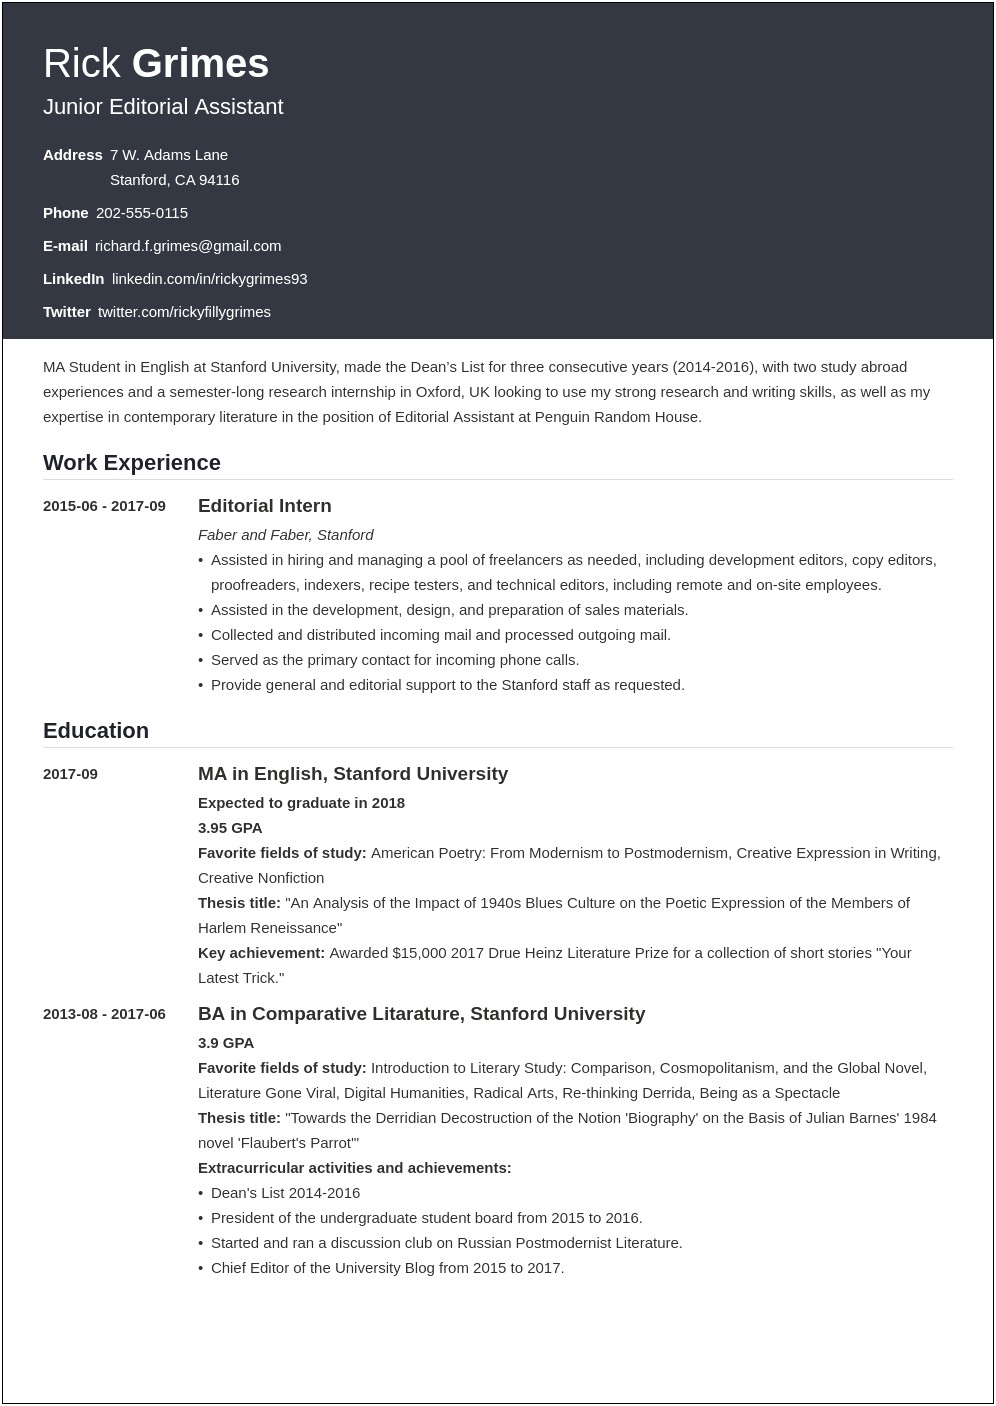 Resume For Person With 1 Year Experience